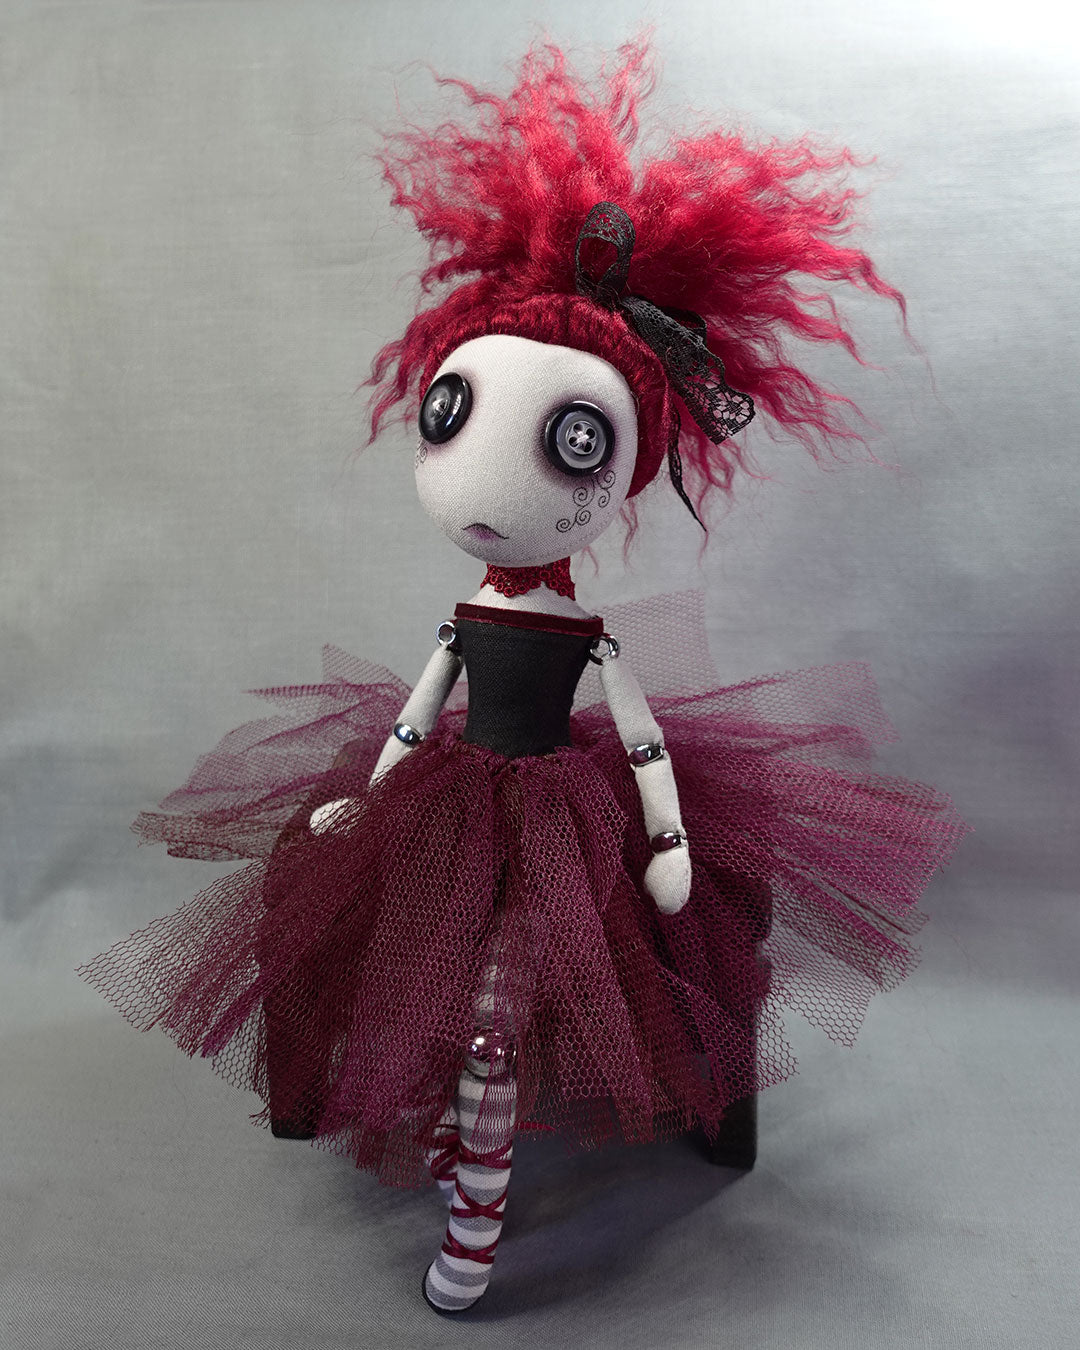 a button eyed Gothic ballerina art doll in burgundy and black